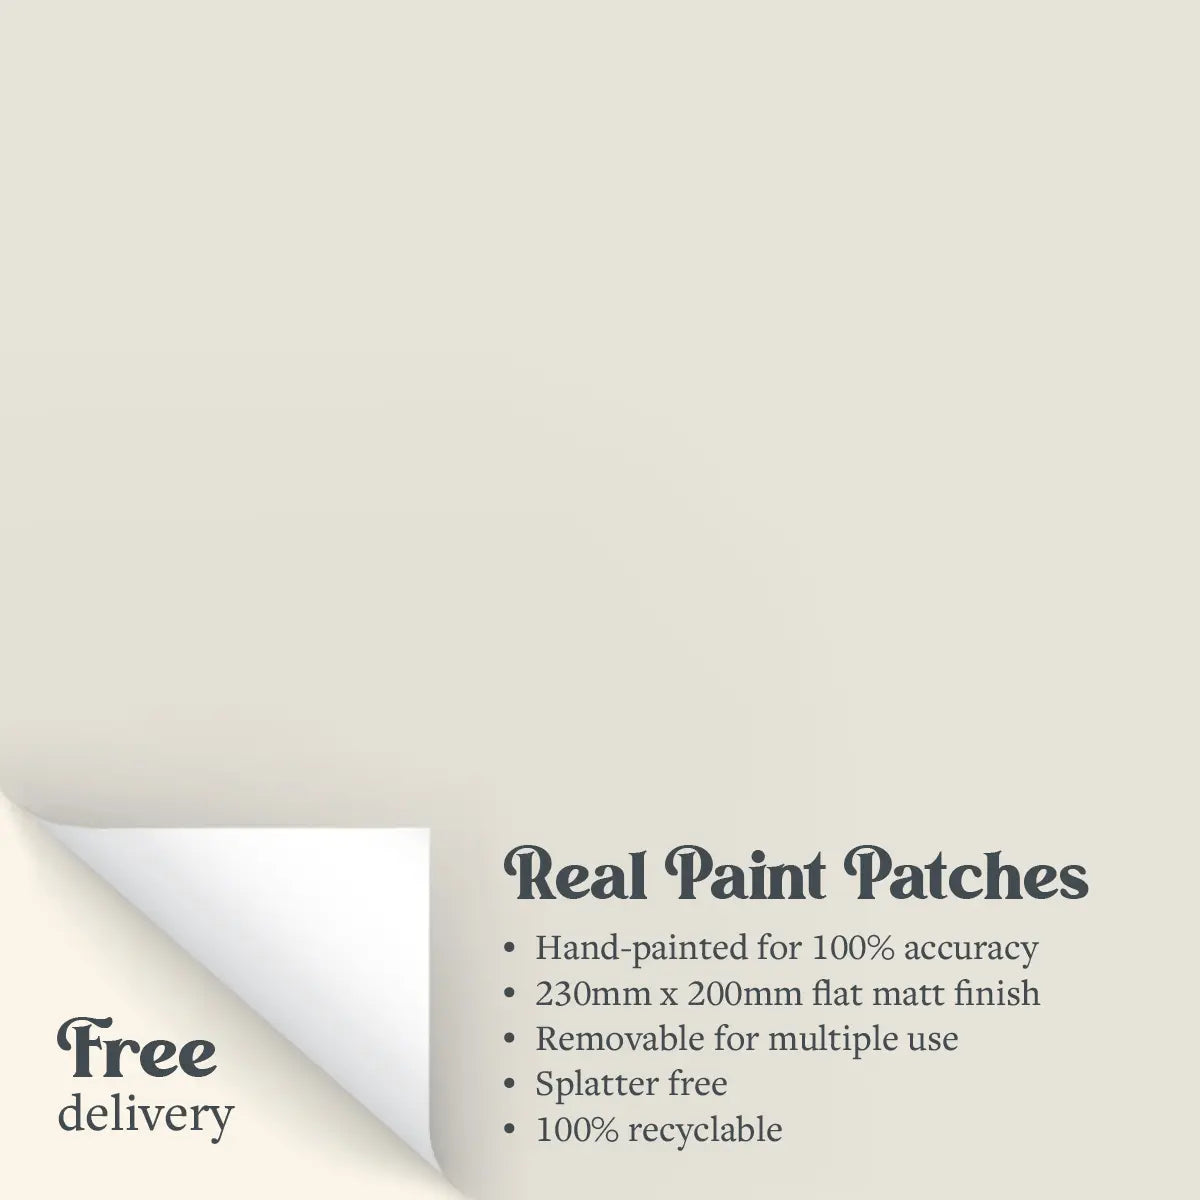 A Real Paint Patch of Zhoosh Paints' Sandy Toes beige paint, with text outlining the benefits.